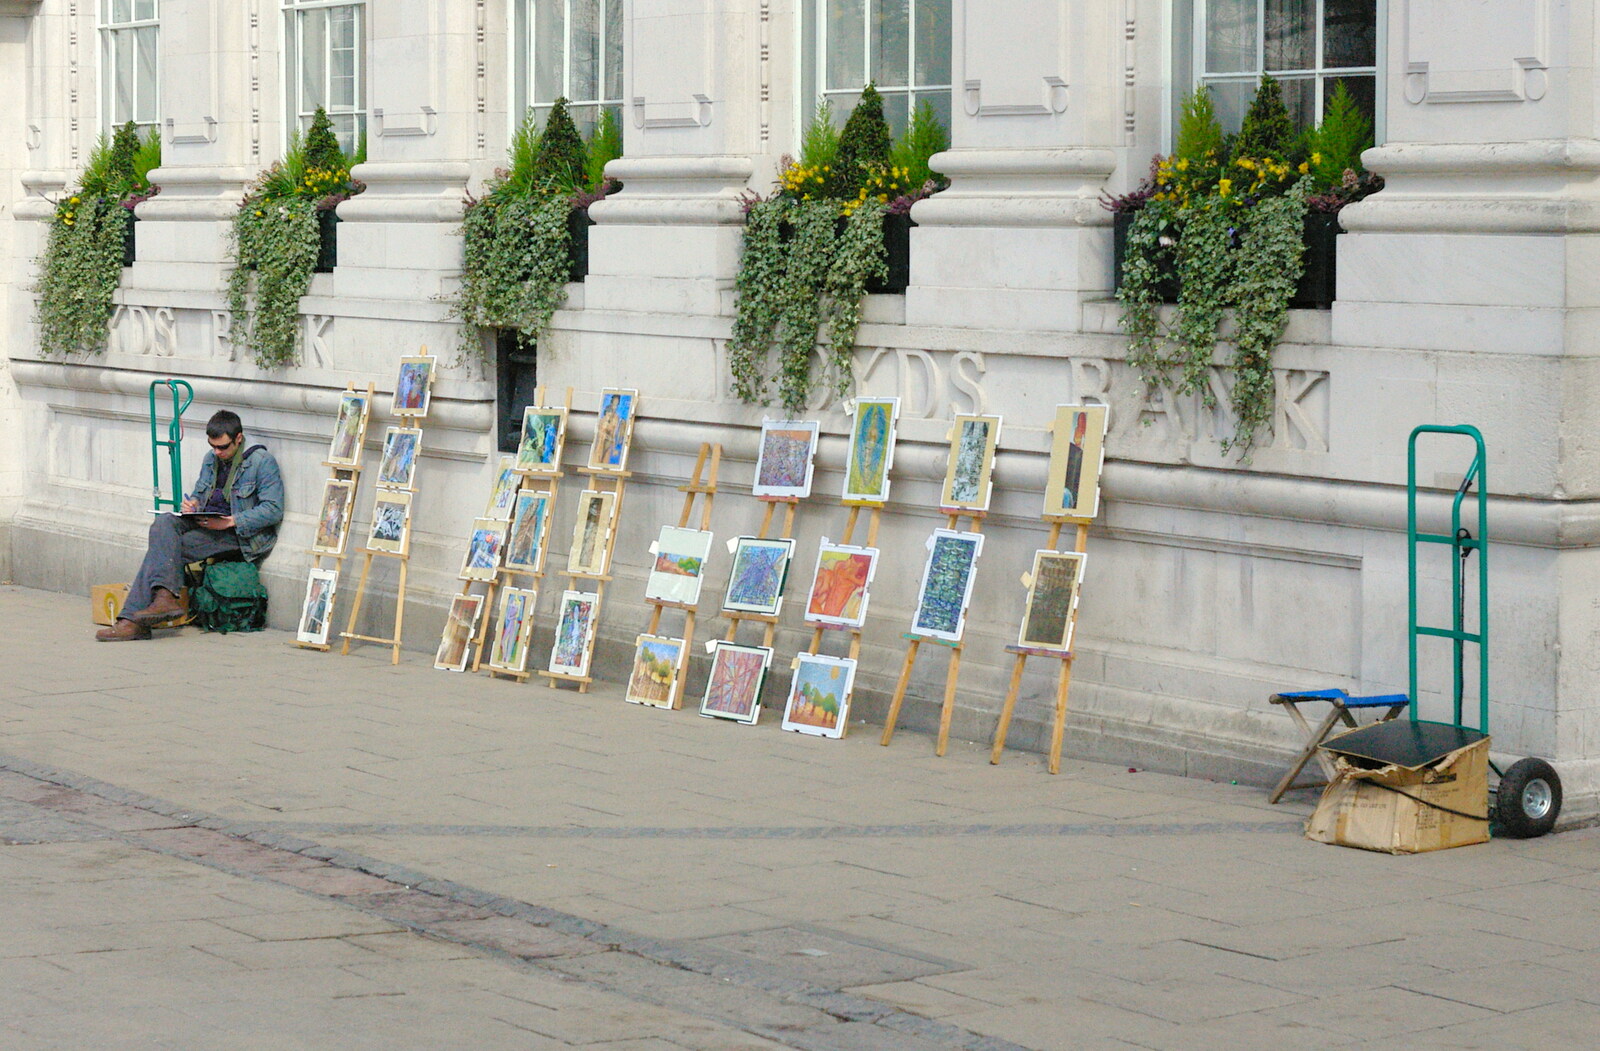 Paintings for sale outside lloyds from Norwich Market, the BSCC at Occold, and Diss Publishing - 10th April 2005